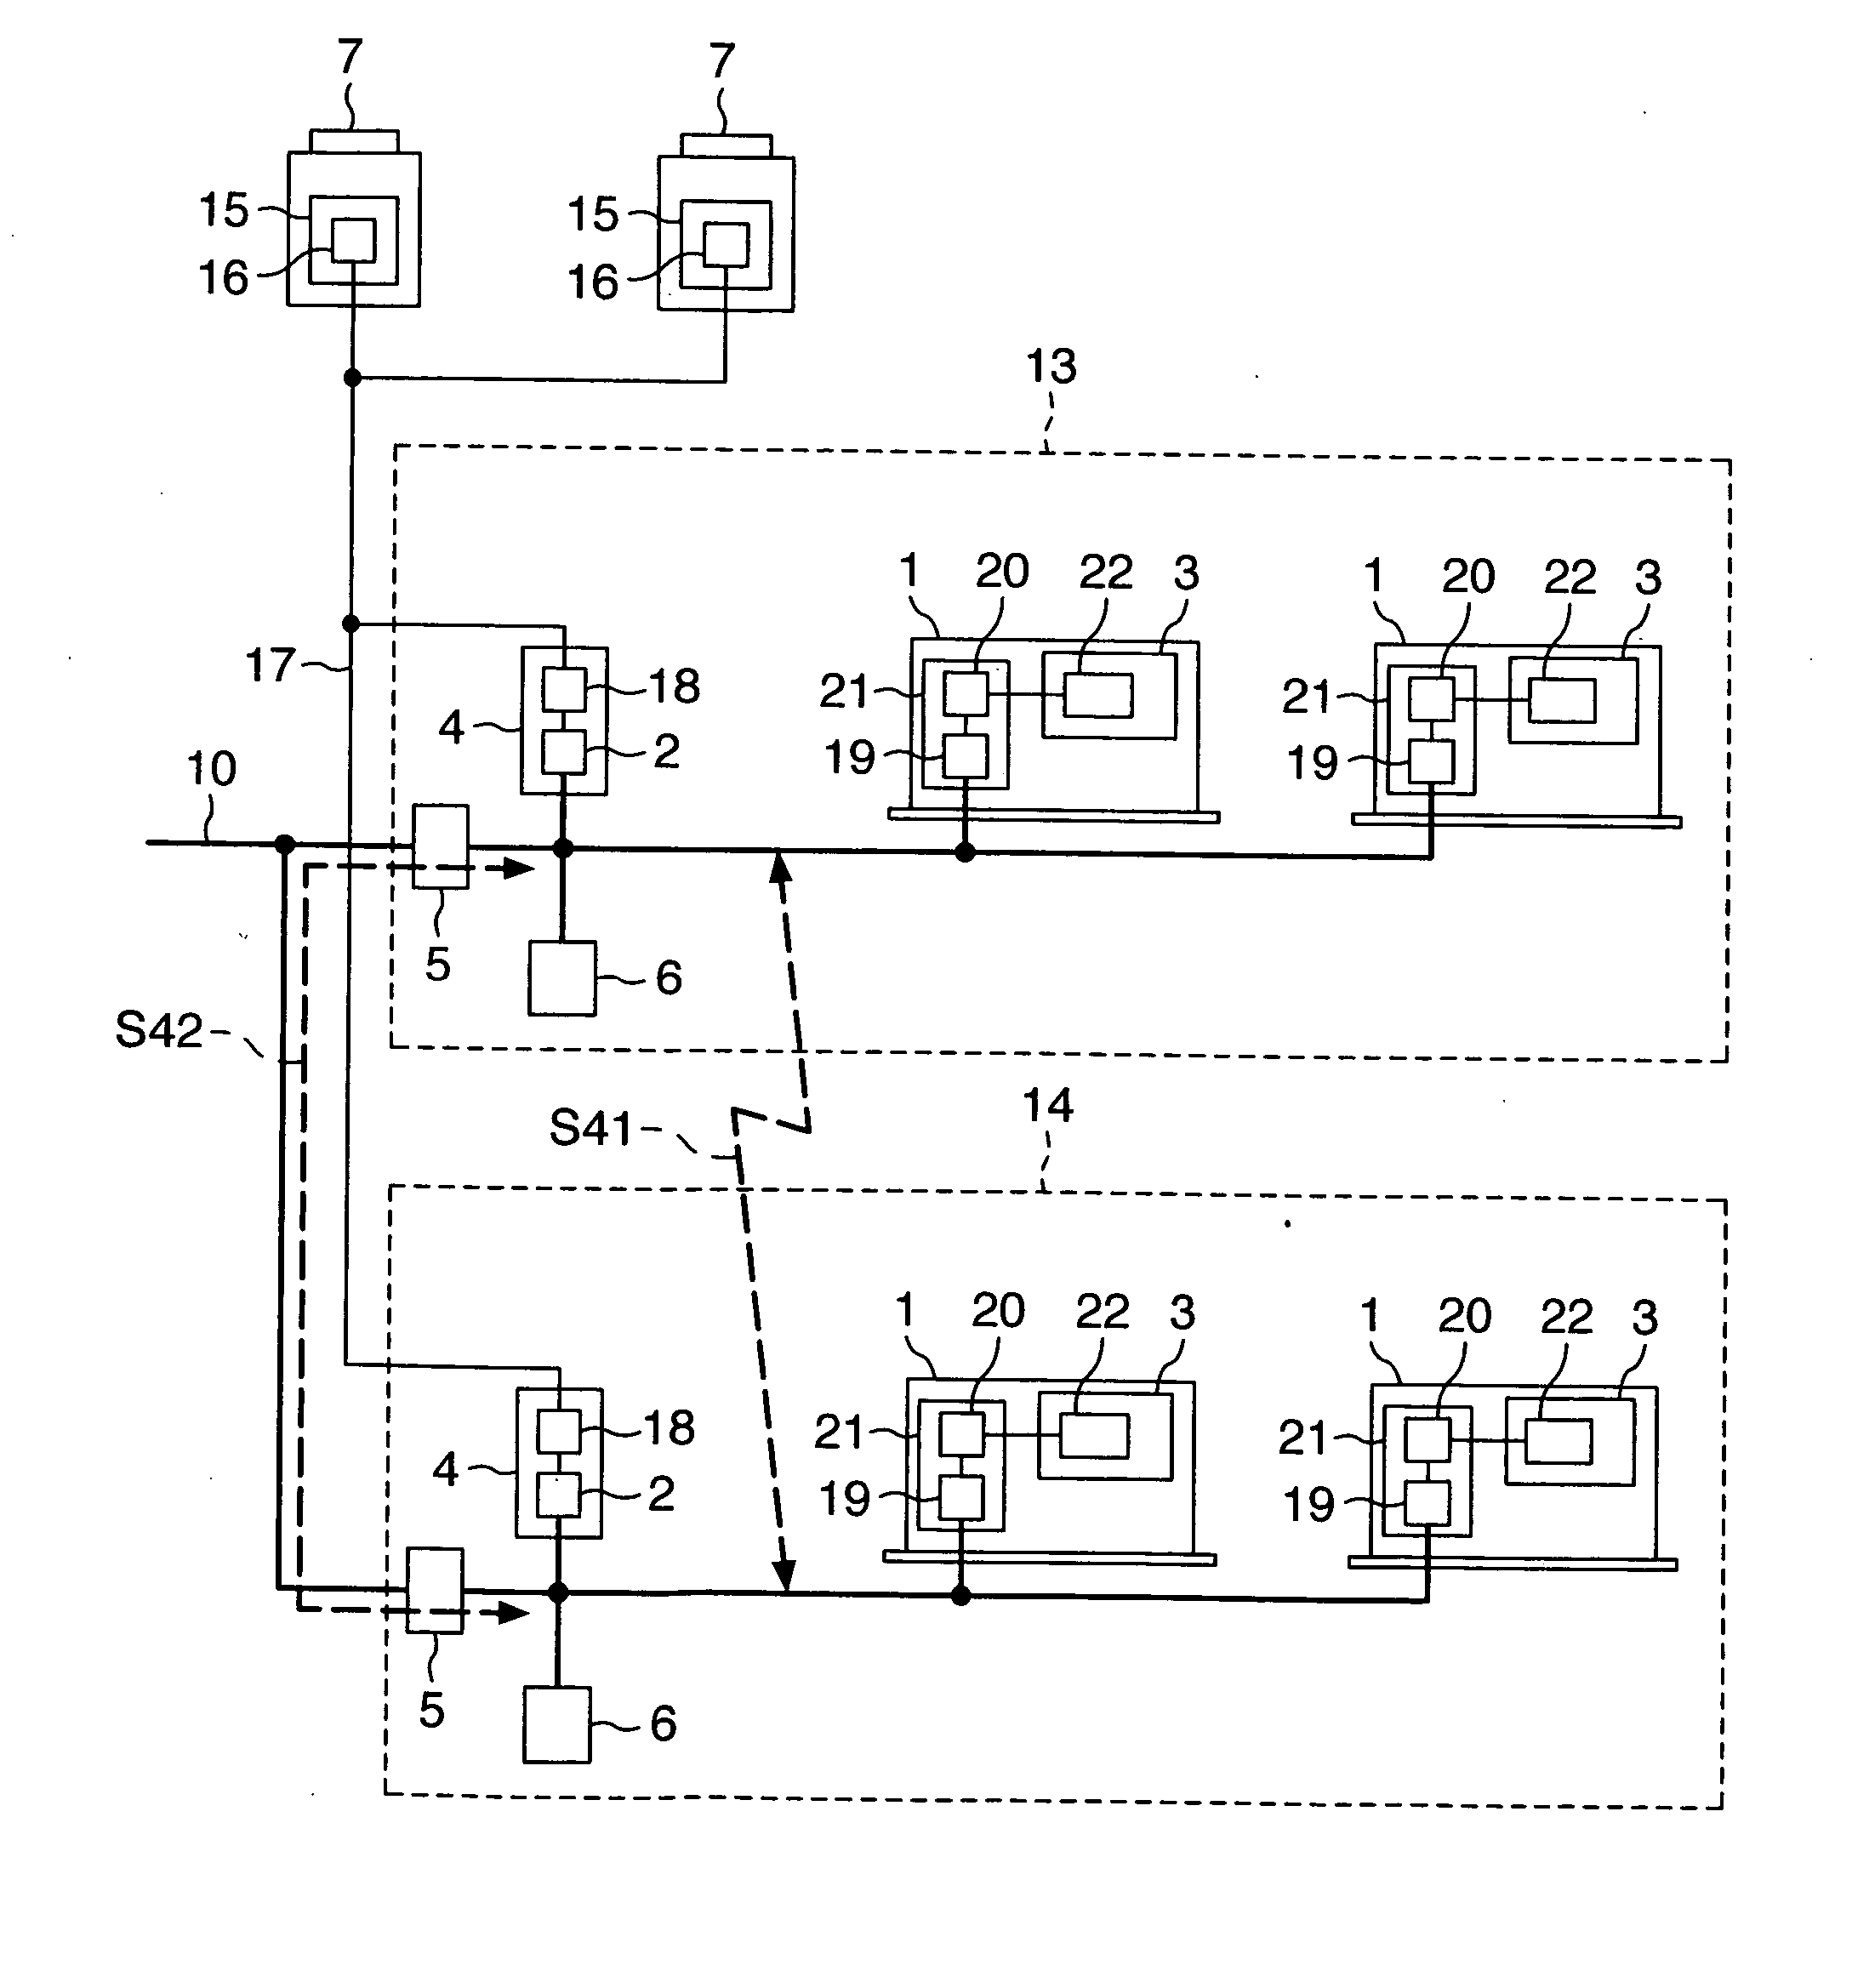 Air conditioner and power line communication system